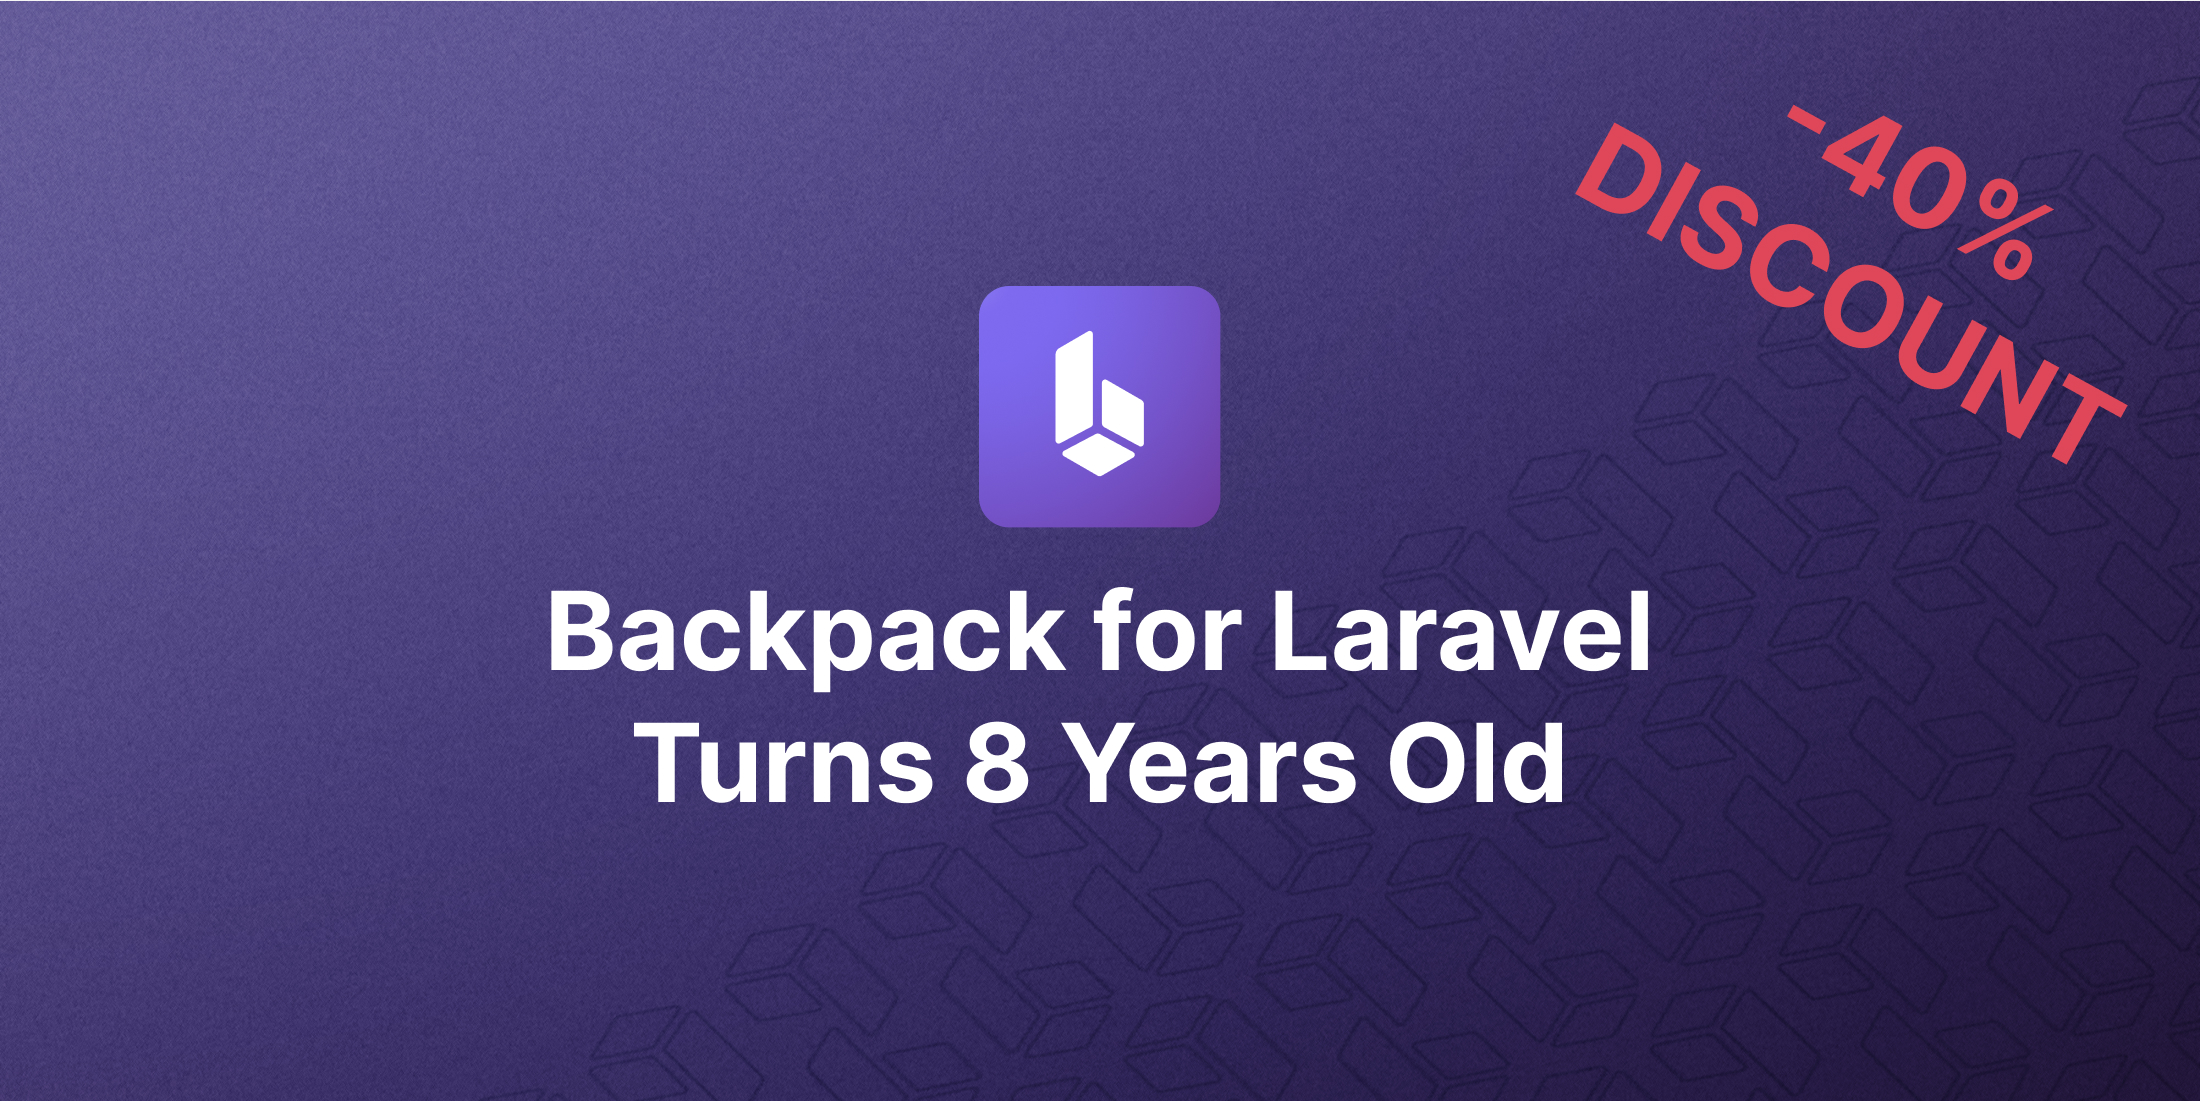 Backpack turns 8 years old, celebrates with 40% discount image